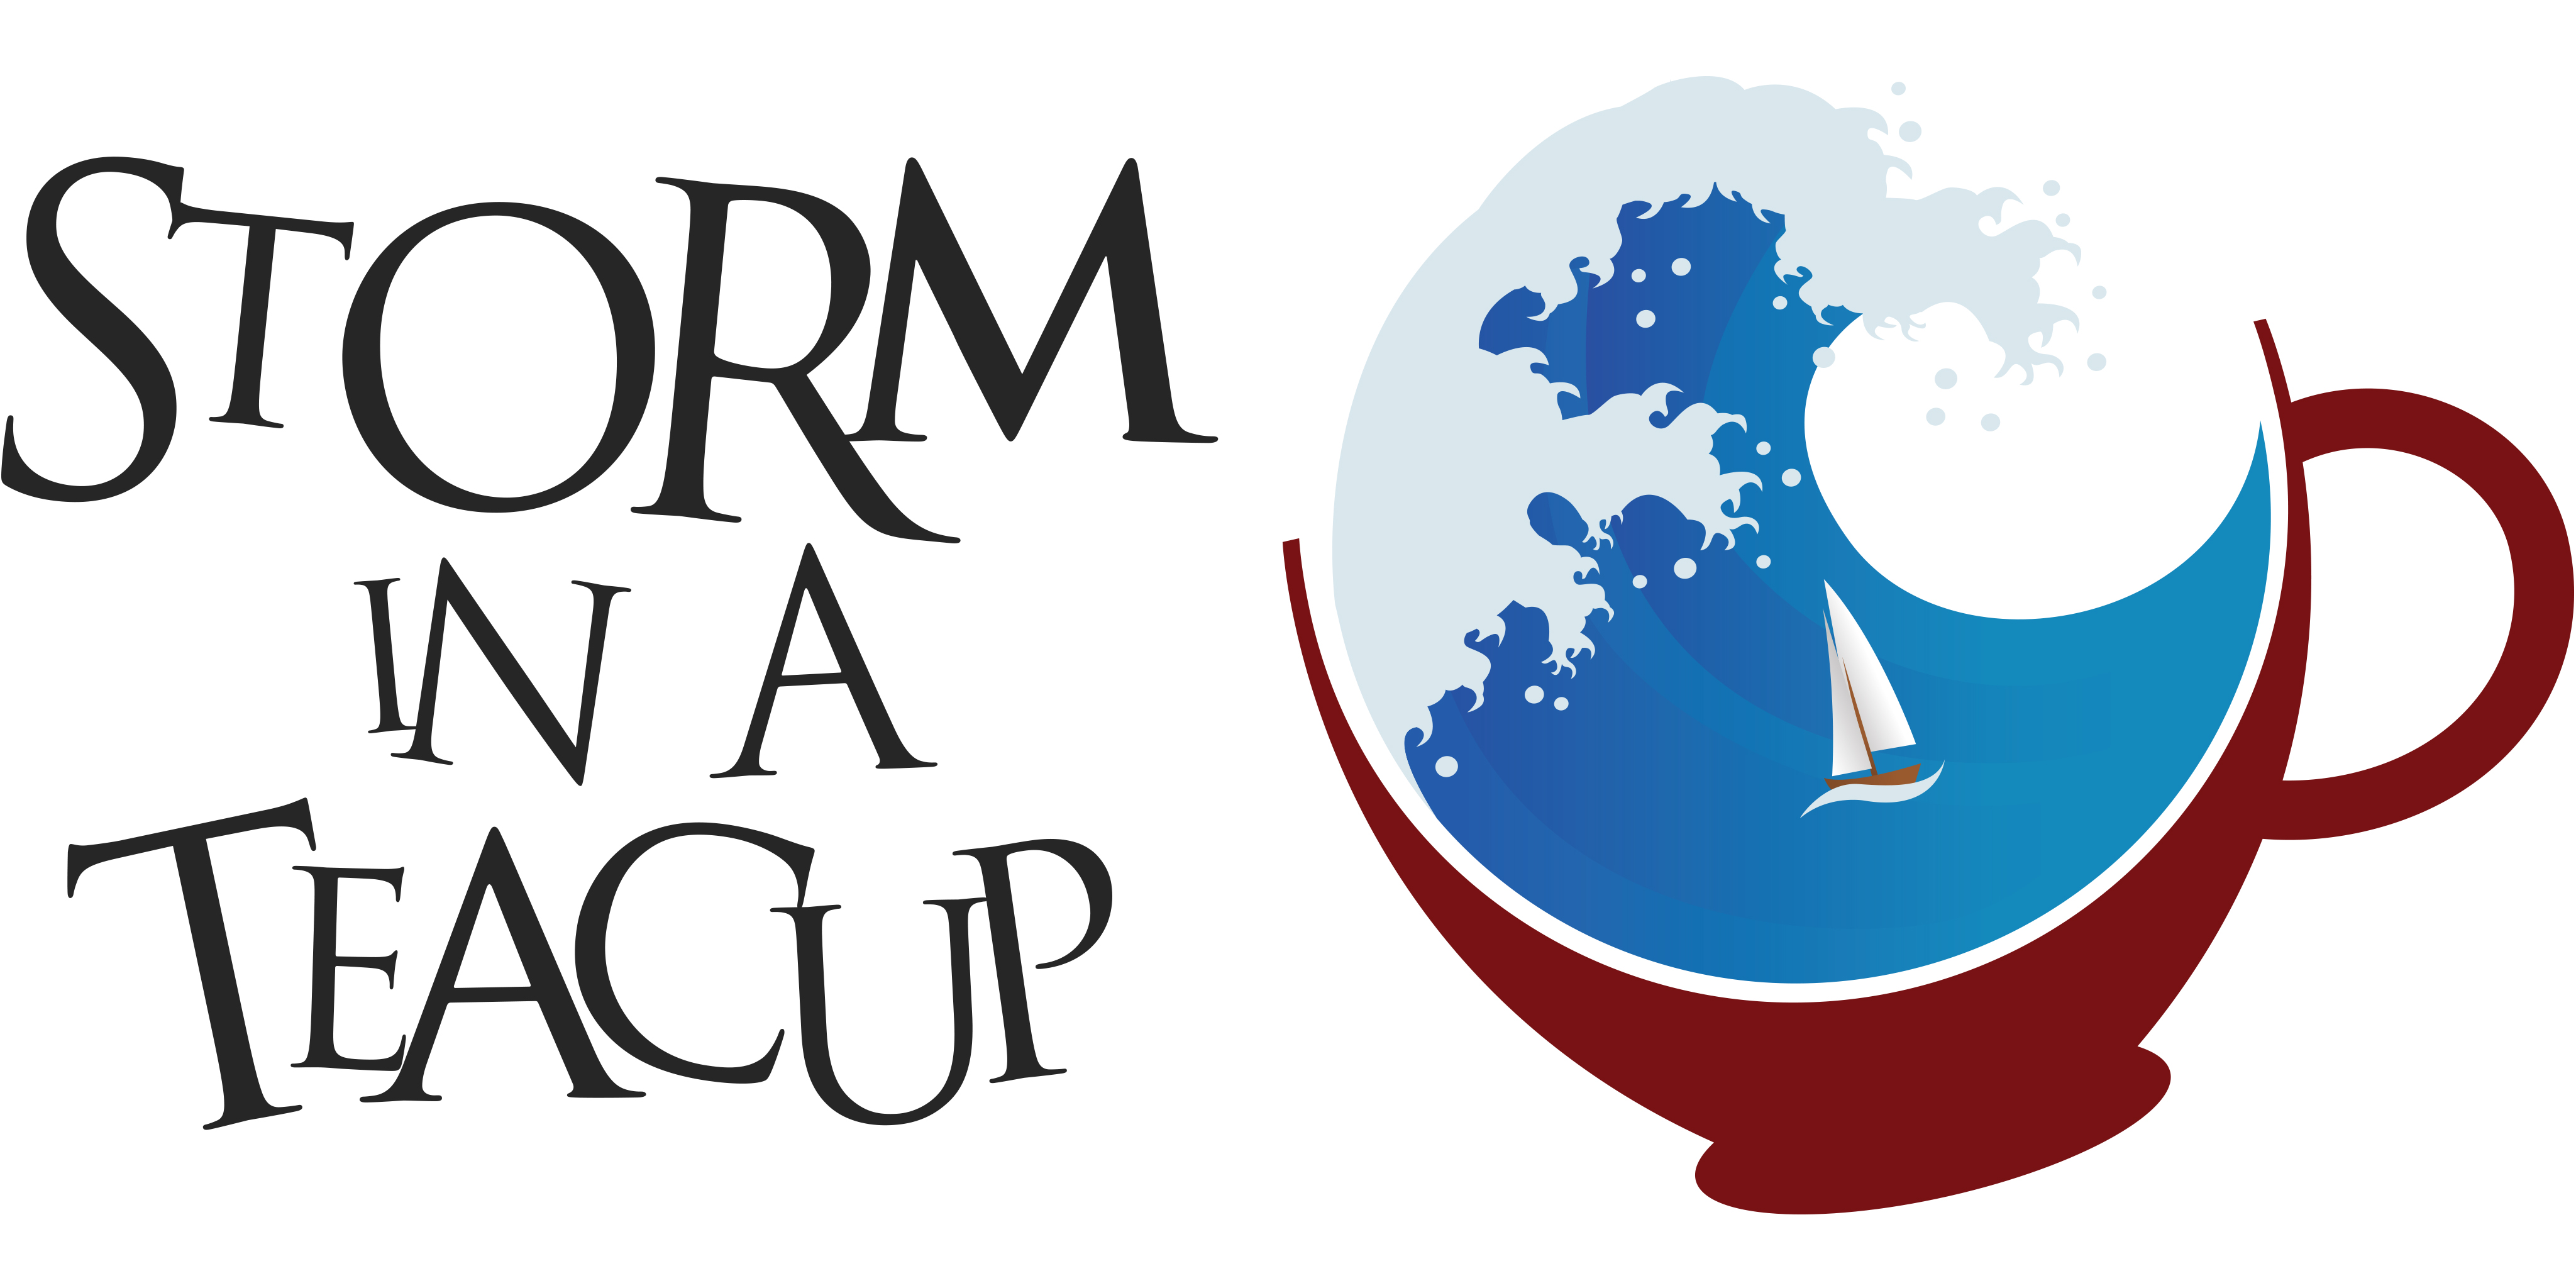 a storm in a teacup company